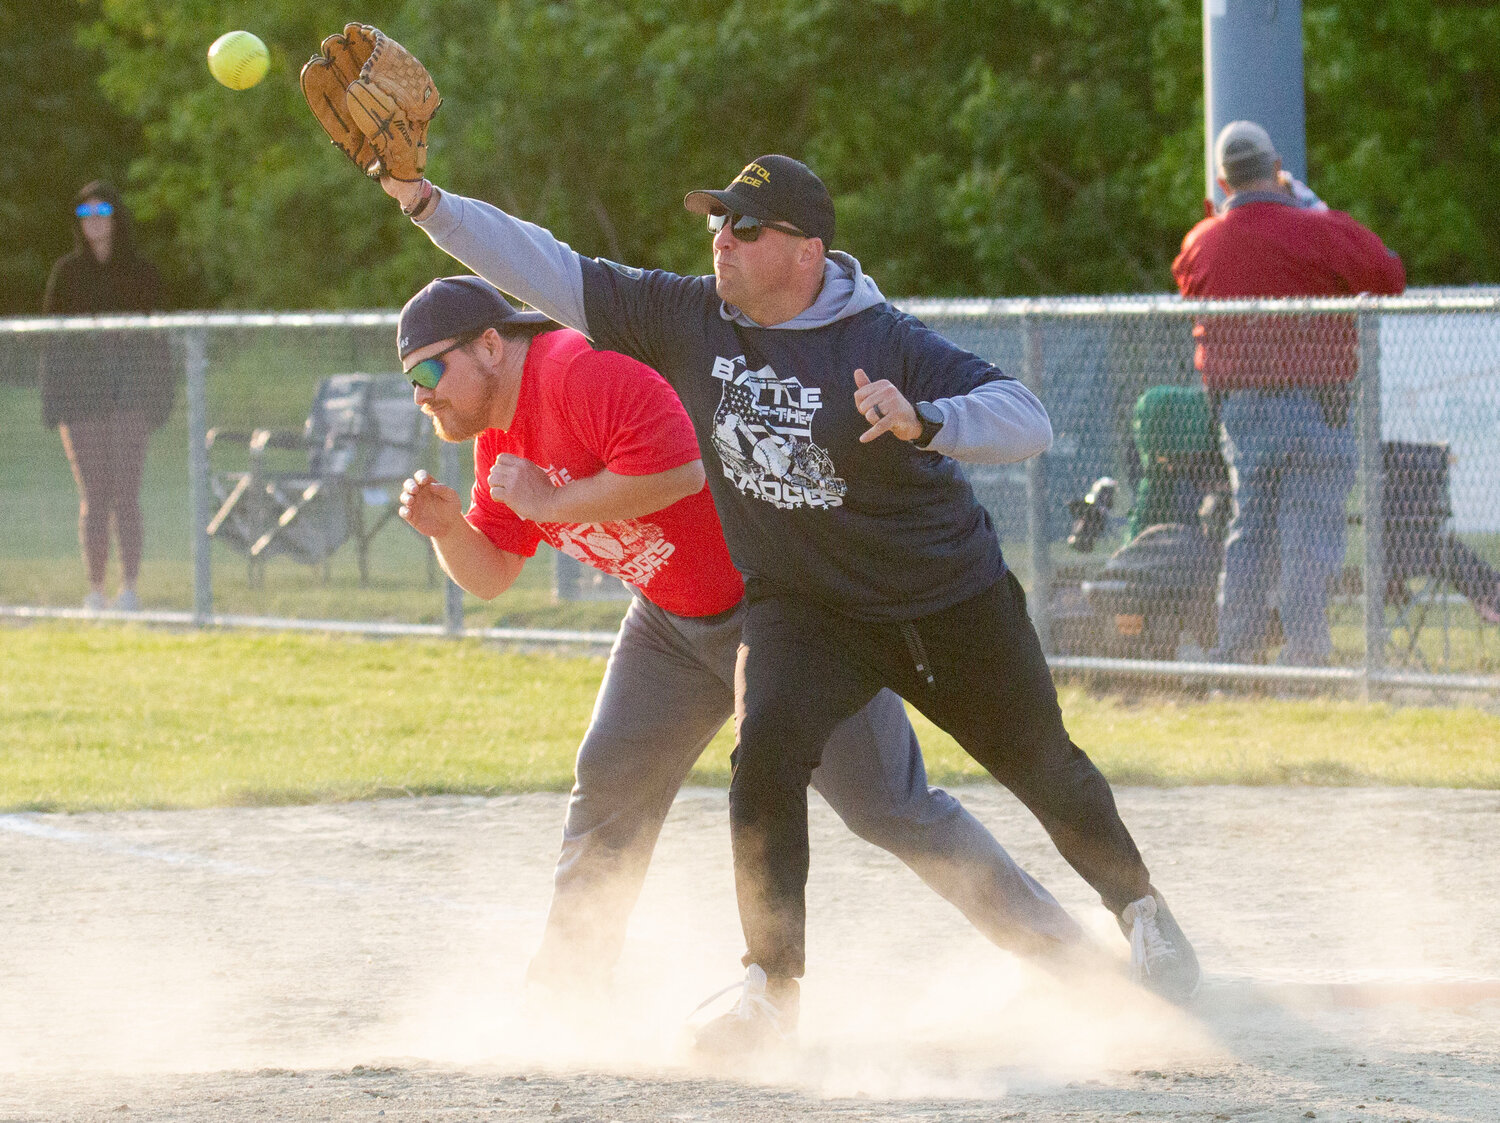 First baseman Brian Morse makes the catch as the police try to double up firefighter, Wilson Luther at first base.